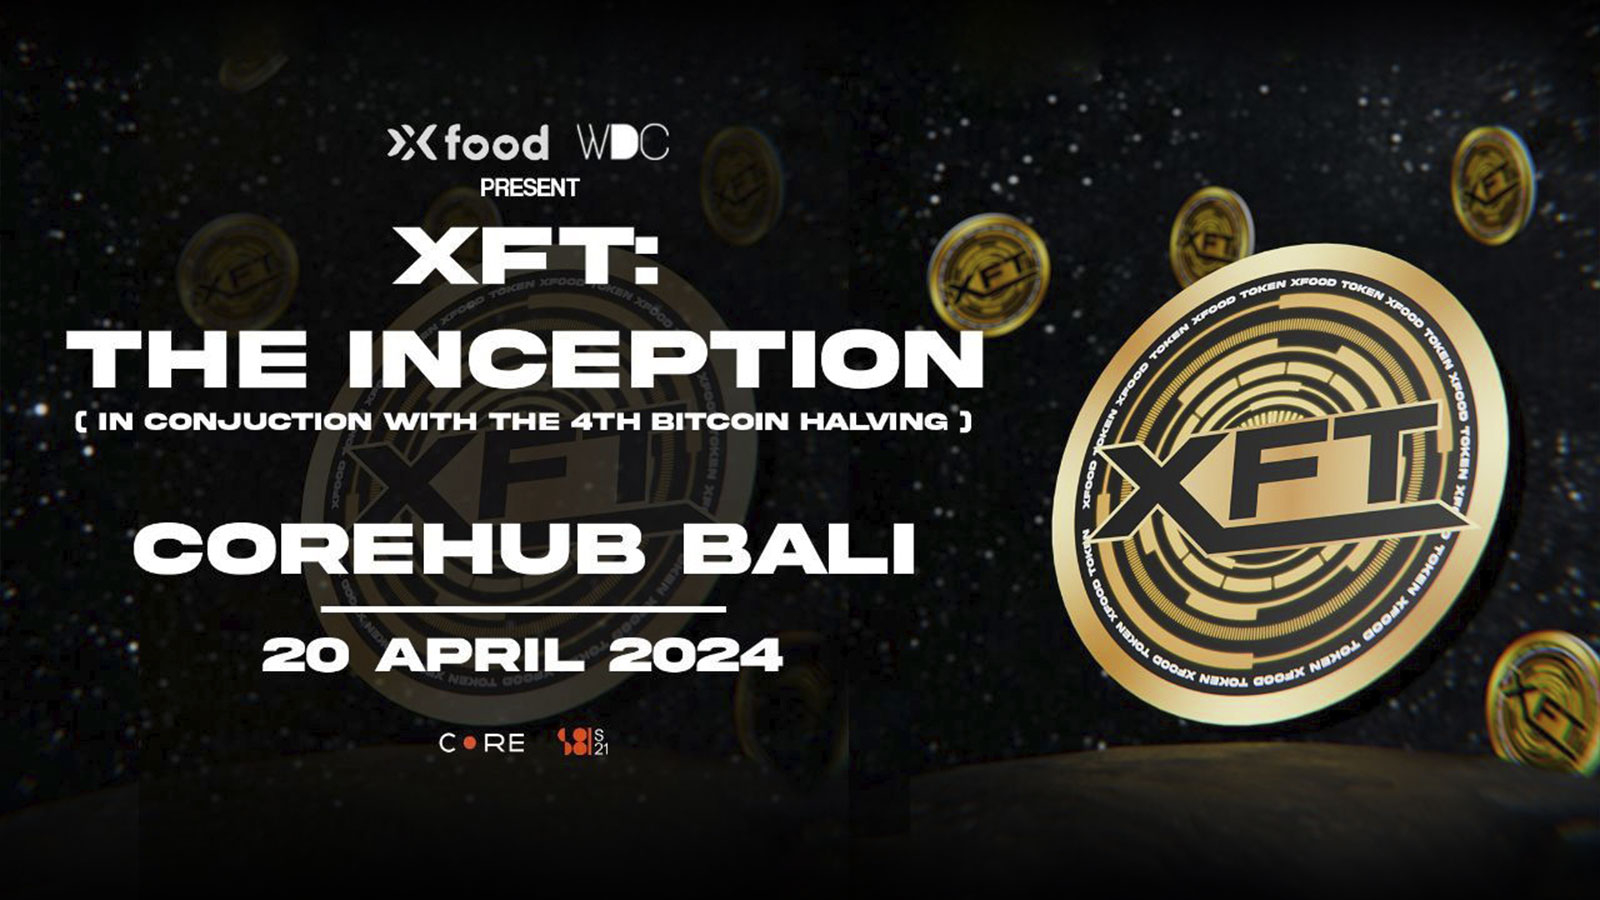 XFood Token ($XFT) Ushers in a New Era of Food Transparency with a Grand Public Sale Event in Bali